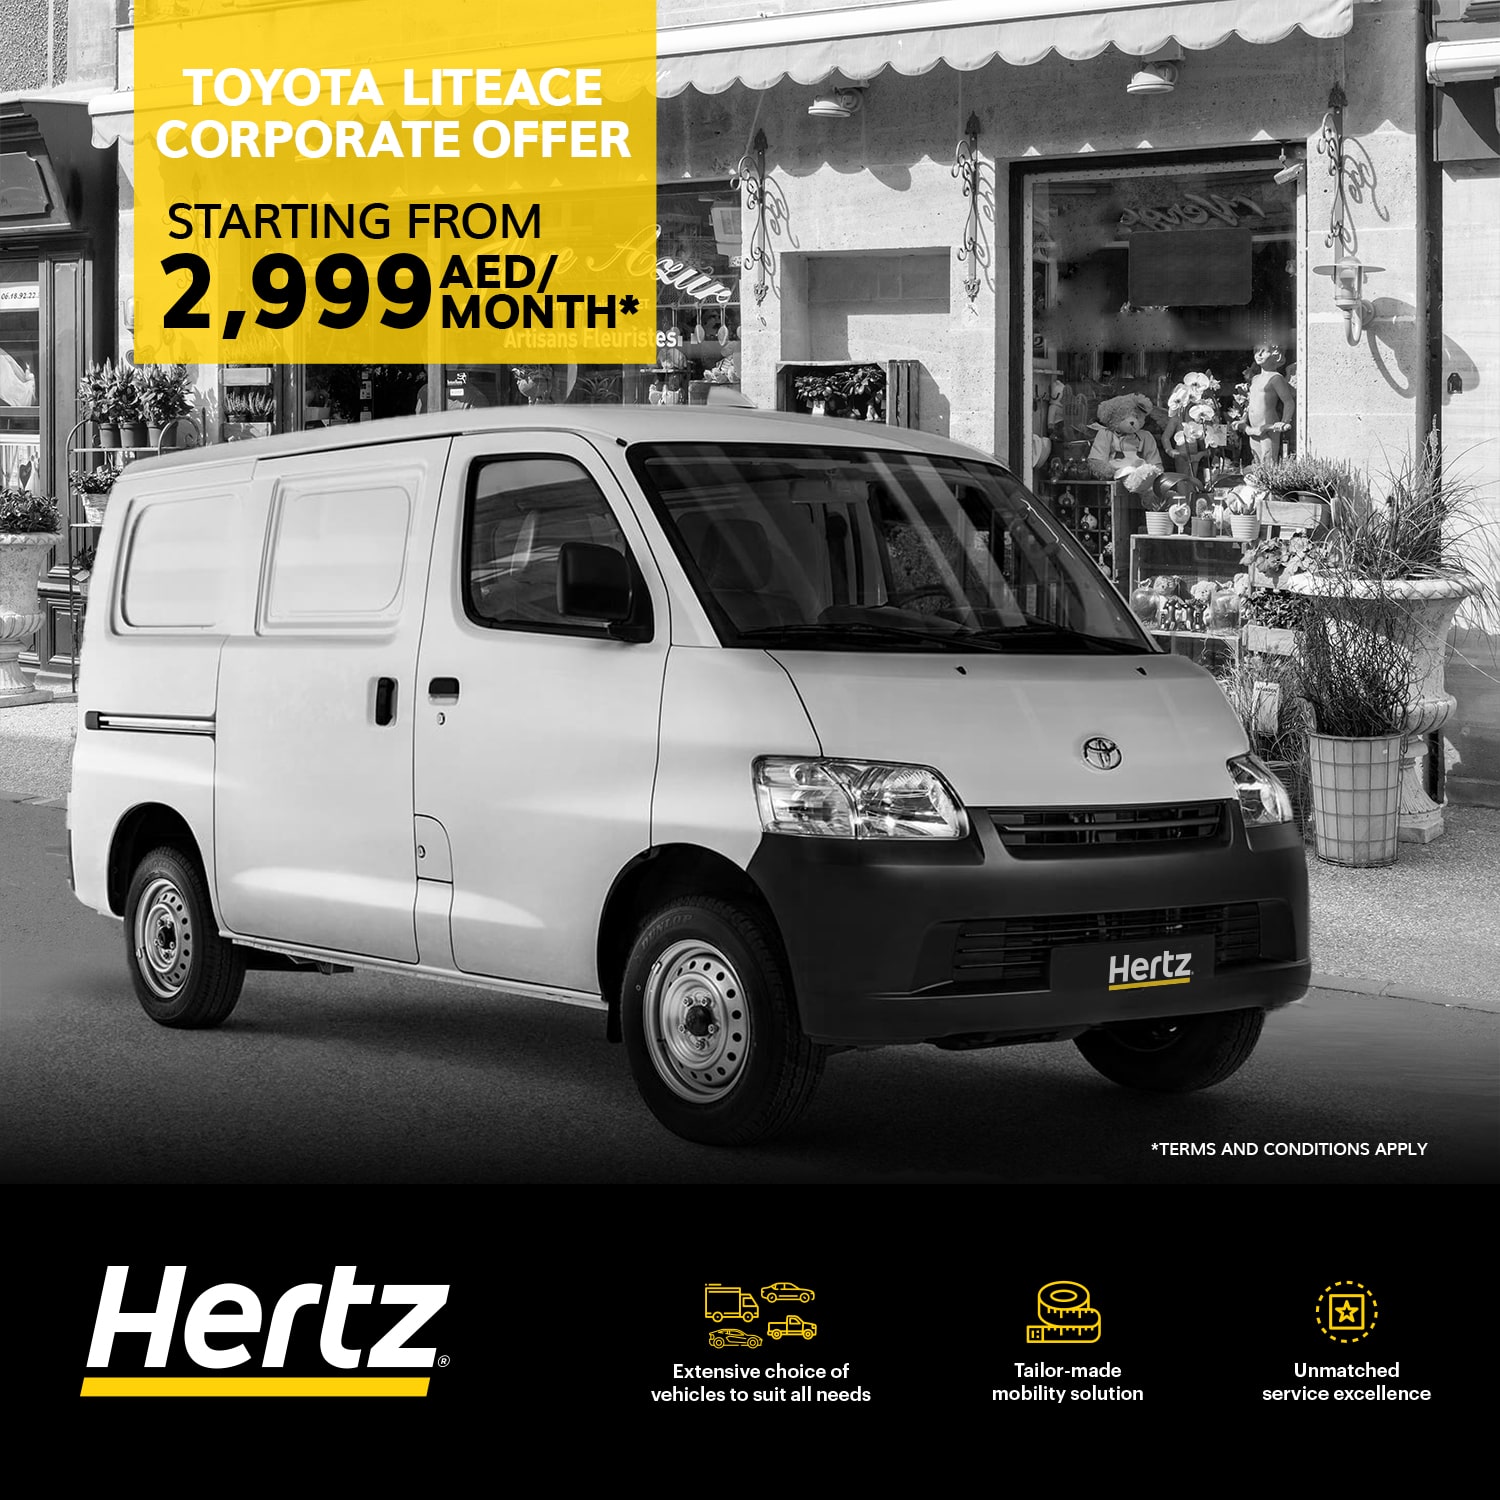 Move your business ahead with our special offer on the Toyota LiteAce.